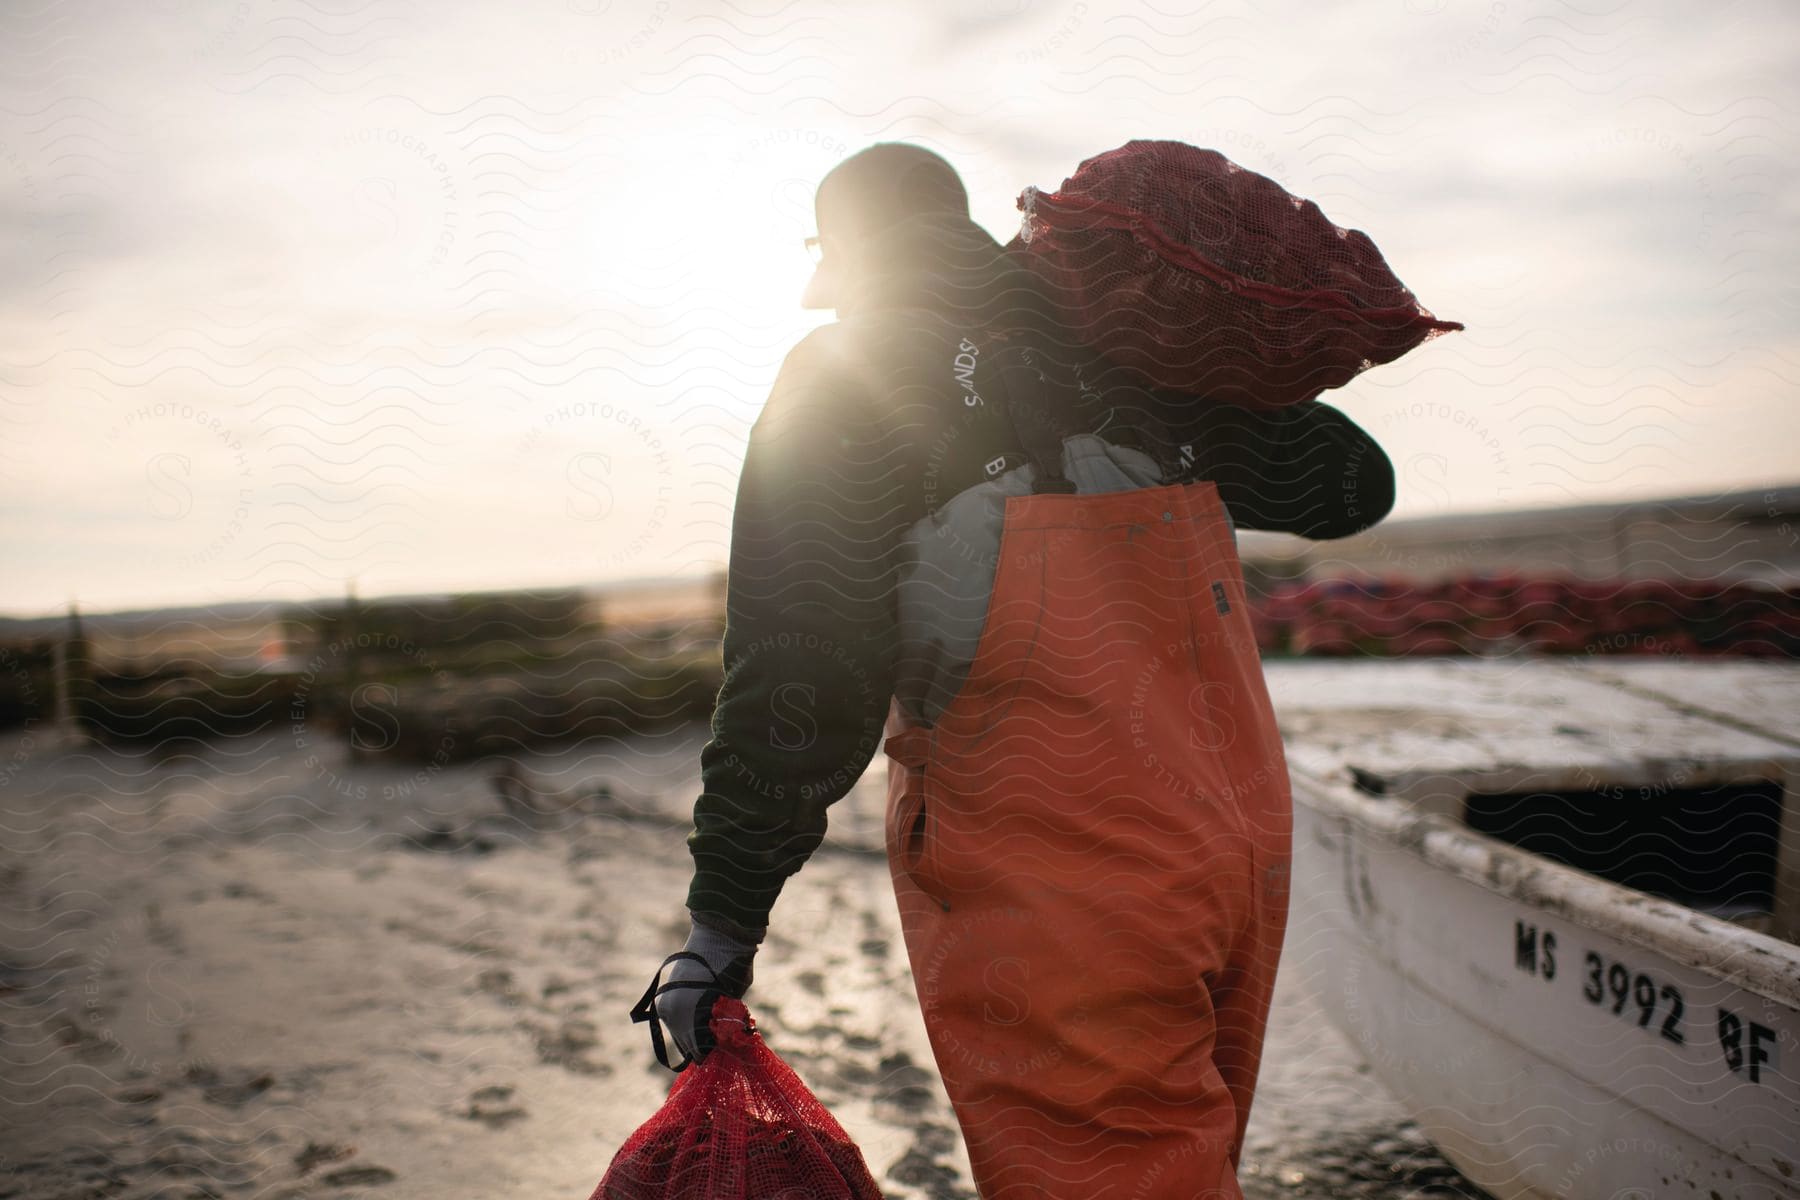 A person carries two bags of crab on a beach near a boat at sunrise